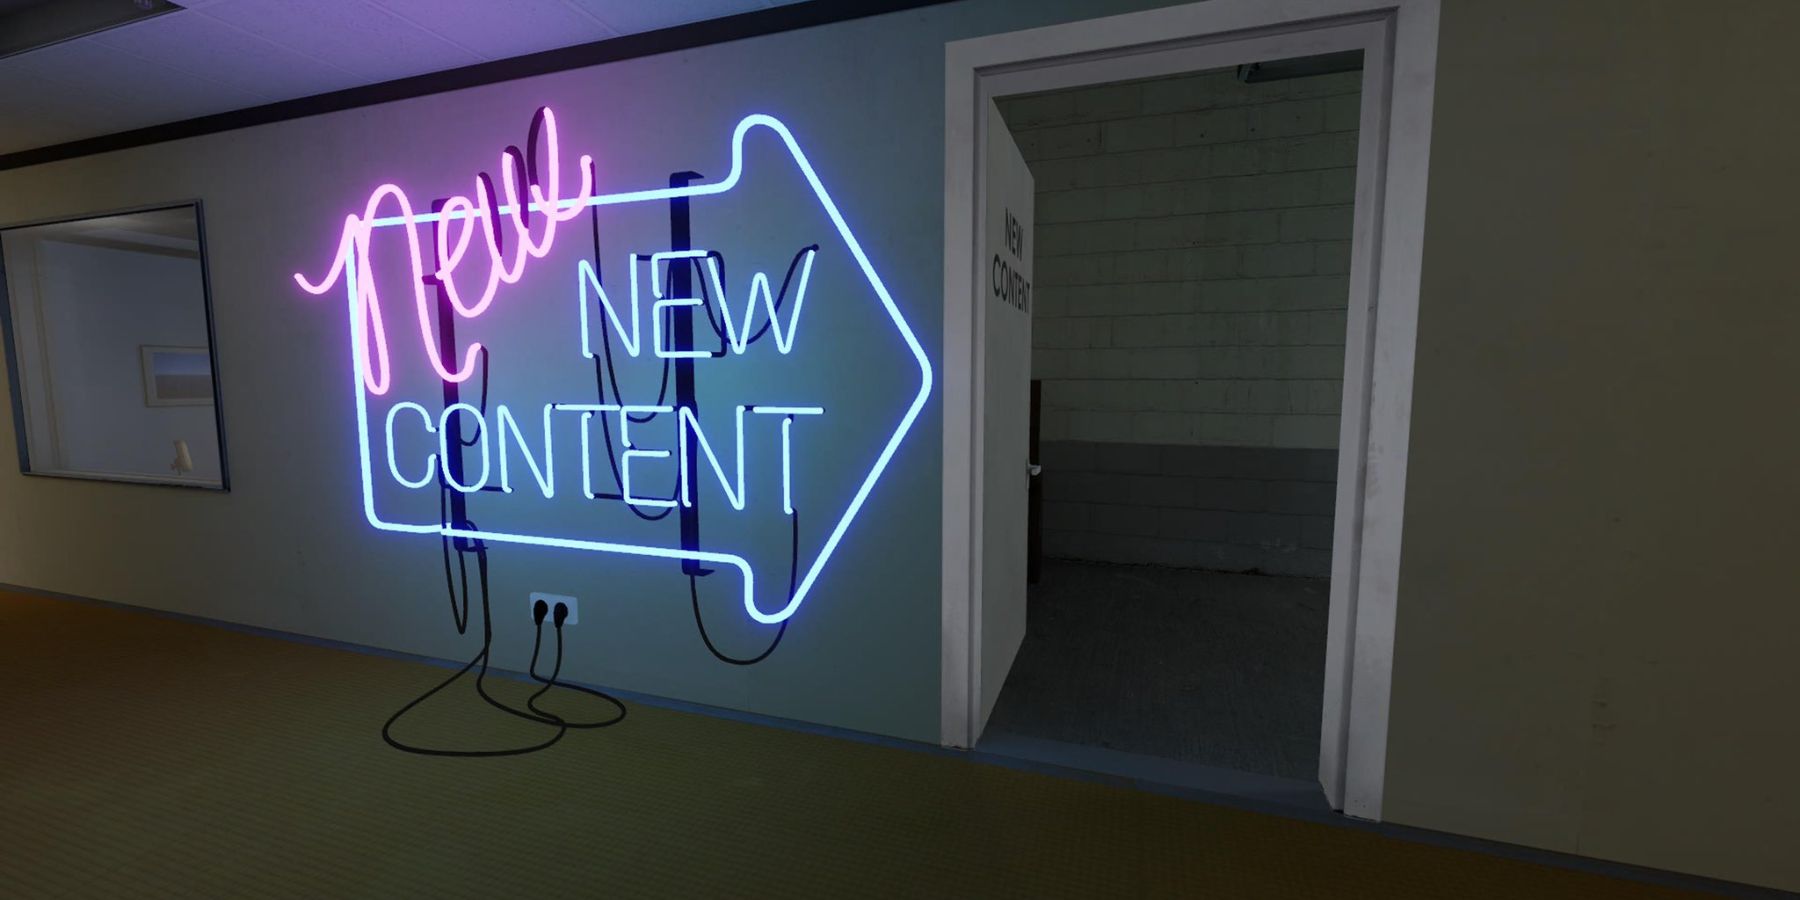 a large neon sign that says "new new content" points toward an open door leading into a tiled hallway